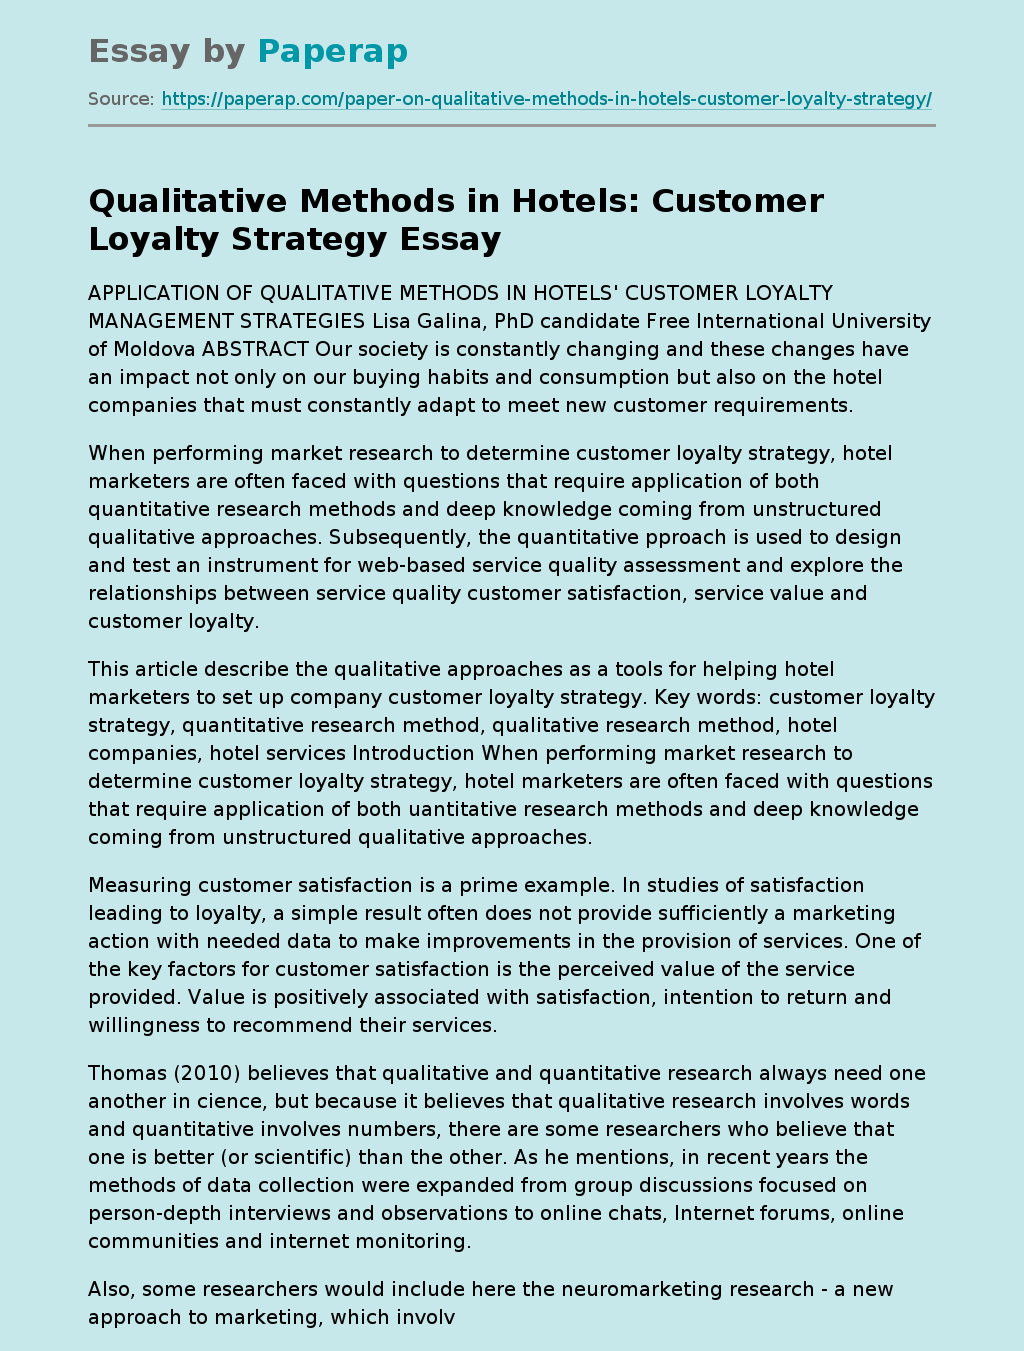 Qualitative Methods in Hotels: Customer Loyalty Strategy